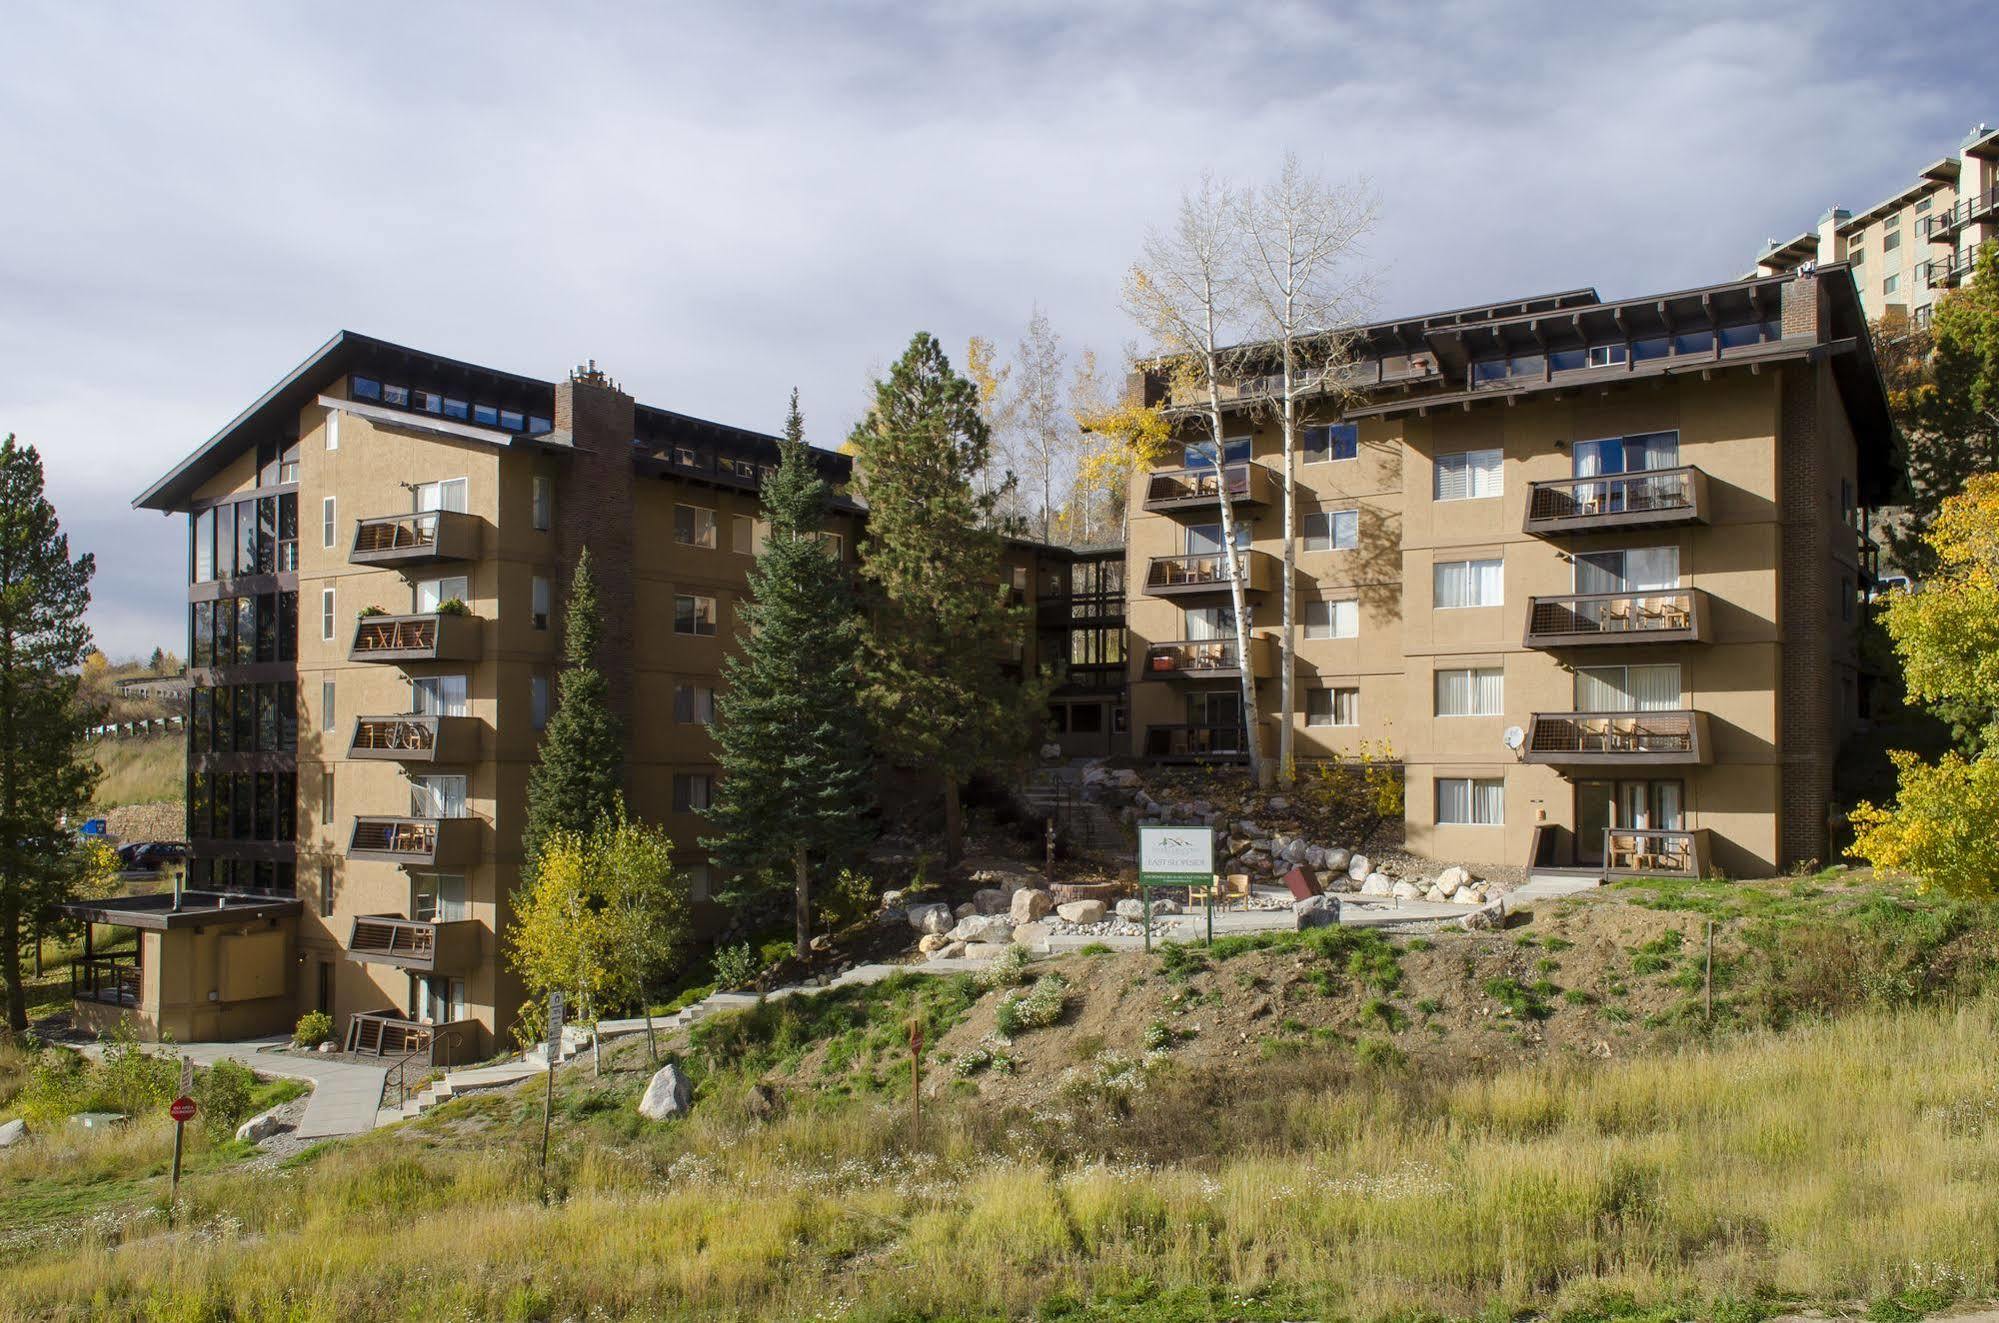 Storm Meadows East Slopeside Hotel Steamboat Springs Exterior photo